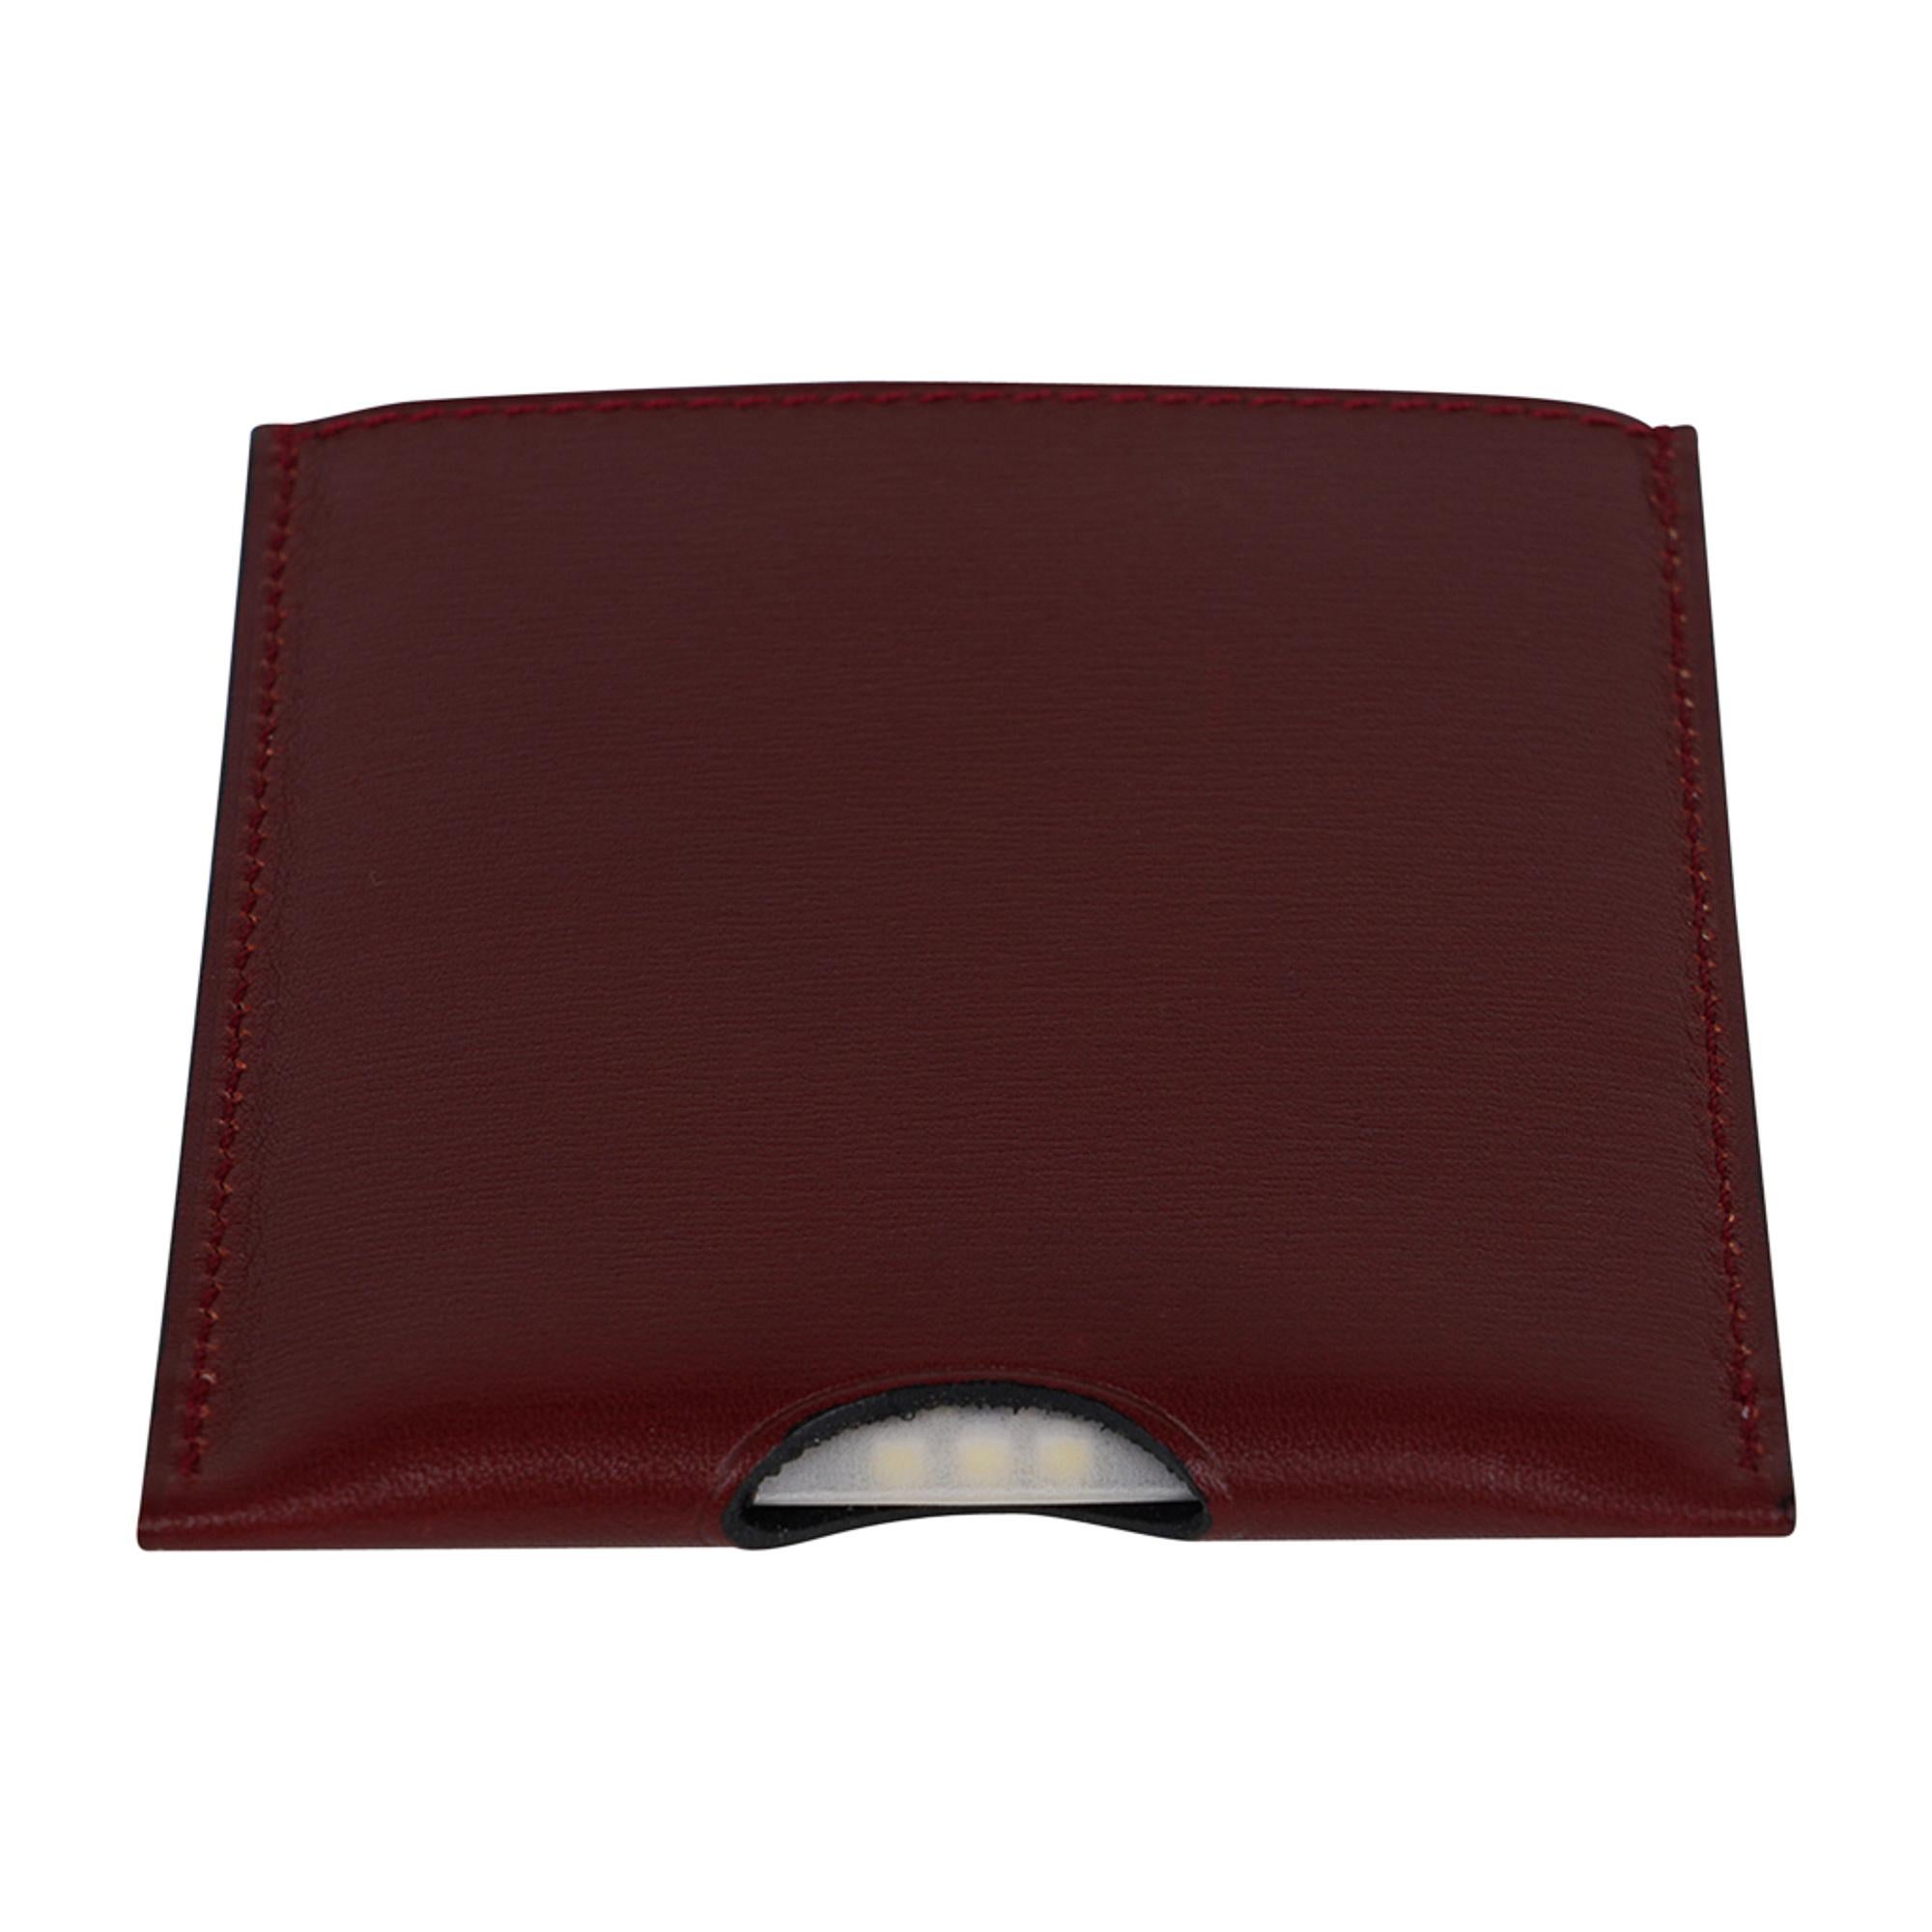 Hermes Lampe de Poche In the Pocket Bordeaux Swift Leather In New Condition For Sale In Miami, FL